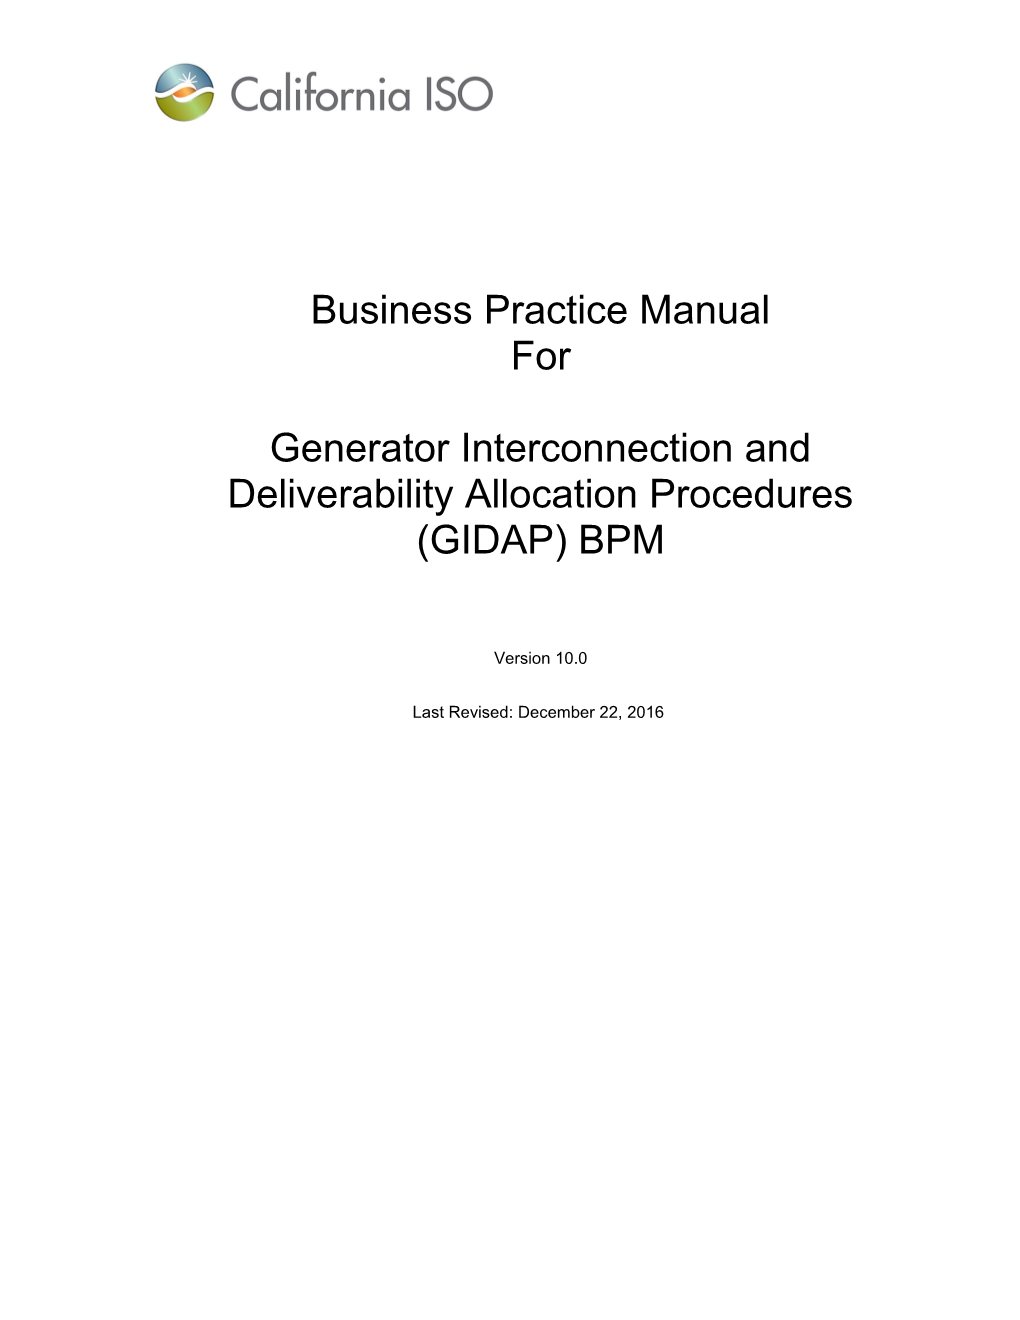 CAISO Business Practice Manualbpm for the Generator Interconnection and Deliverability